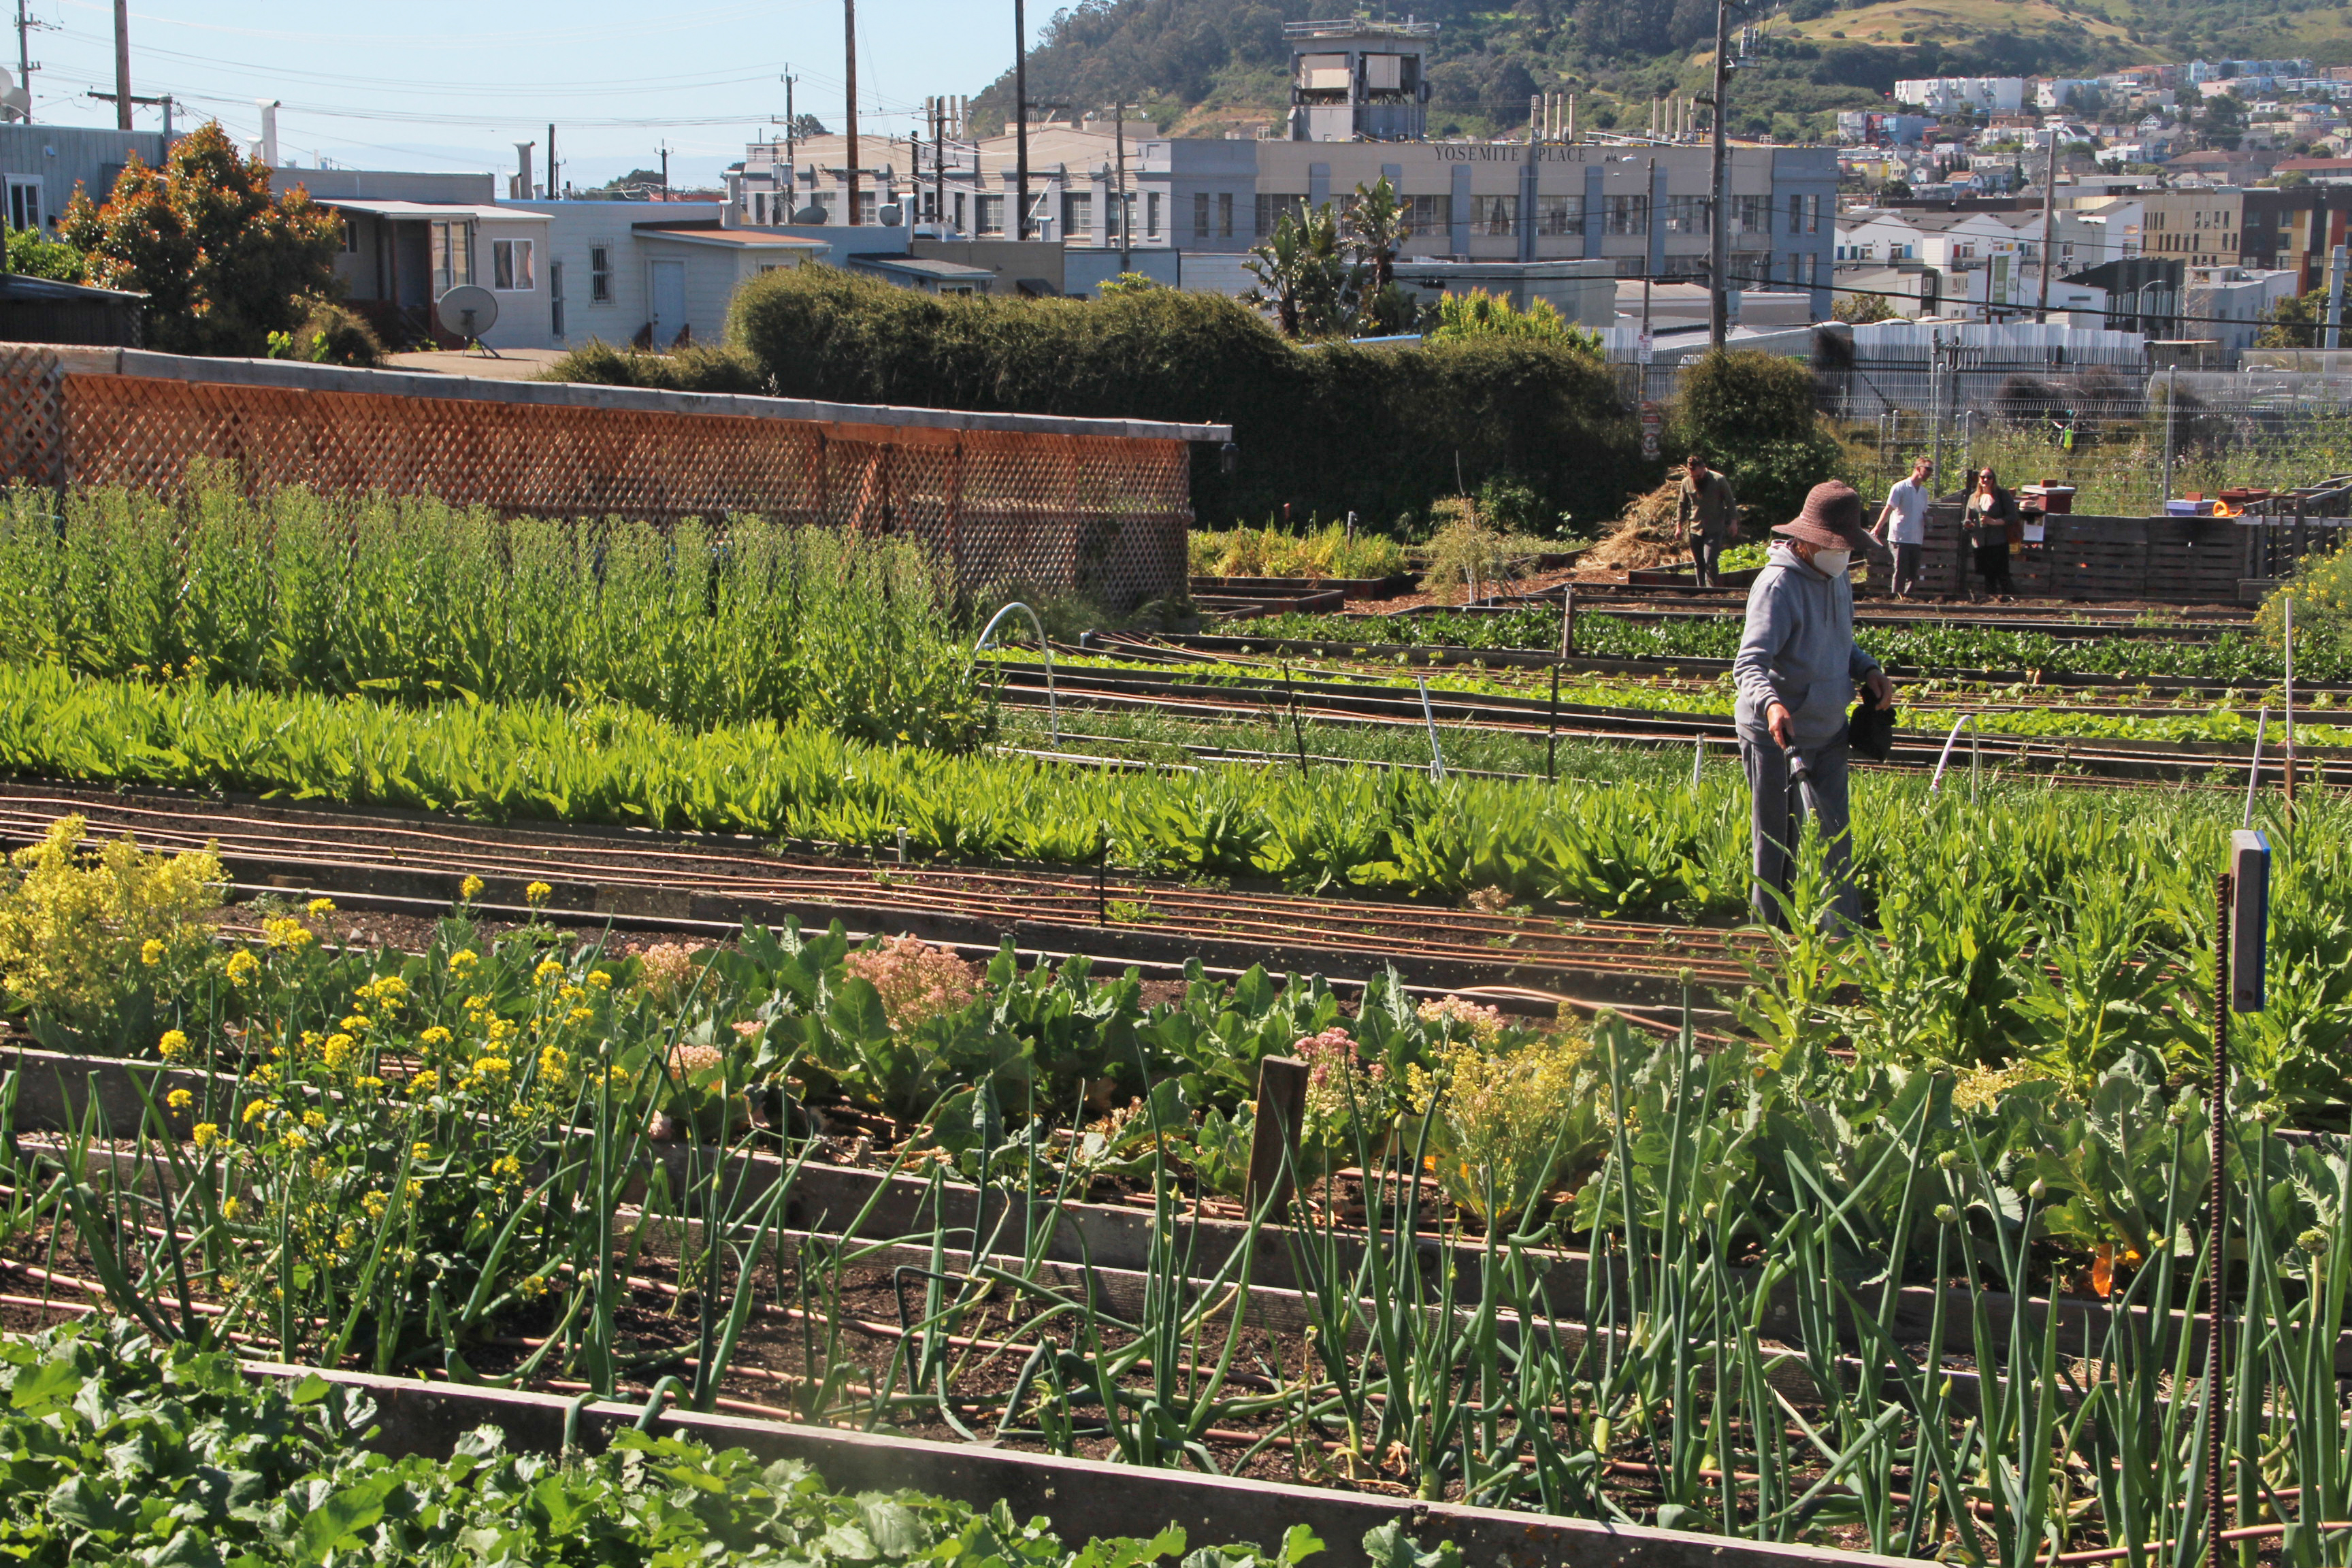 A man tends to plants in a sunny urban garden with rows of vegetation and buildings in the background.